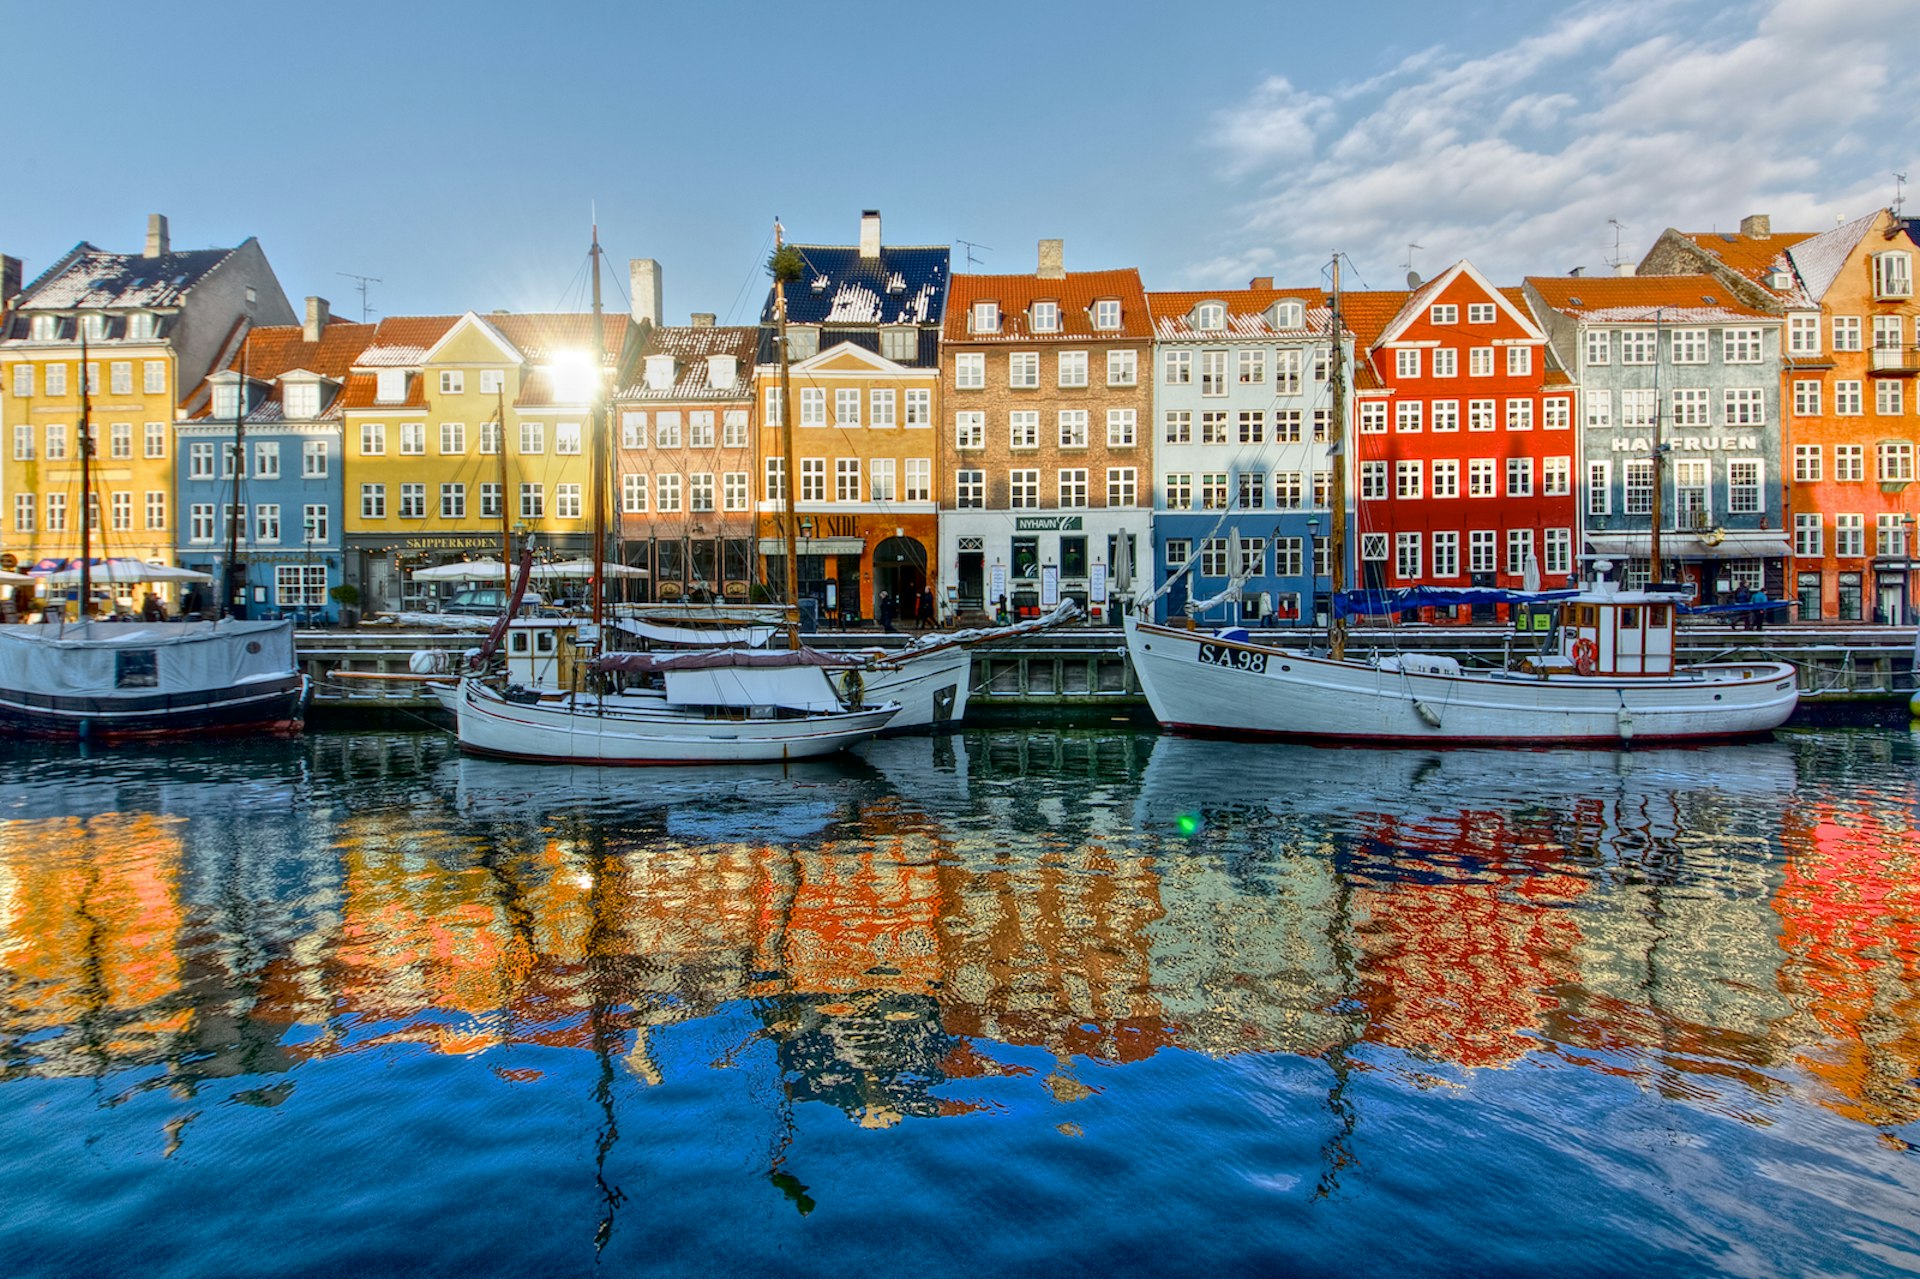 Nyhavn is a 17th-century waterfront, canal and entertainment district in Denmark